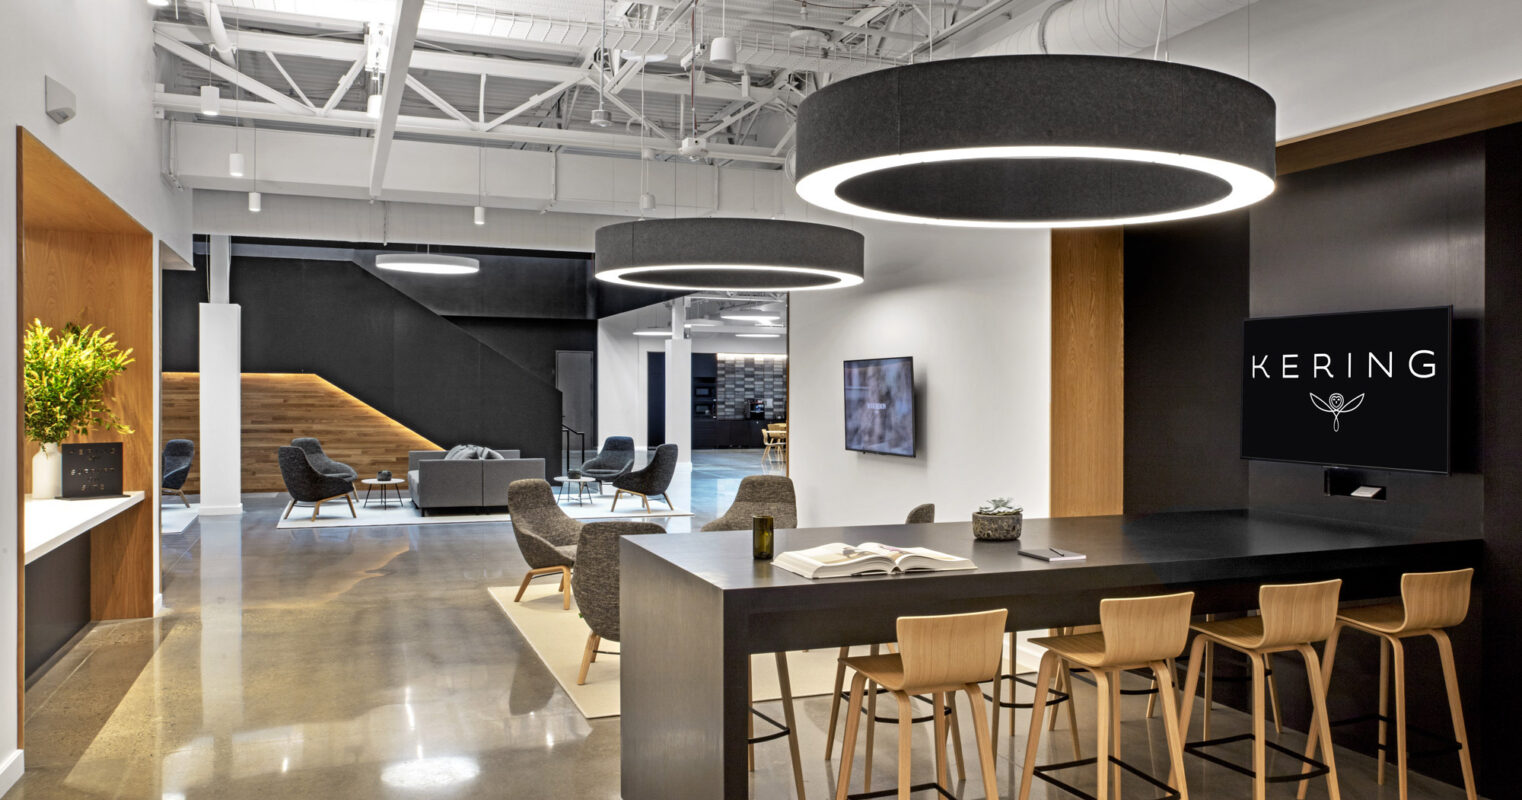 Modern office lobby with a monochromatic color scheme, featuring circular overhead lighting and a black reception desk with a branded logo. Architectural elements include exposed ceiling beams and a wooden staircase leading to an upper level. Contemporary lounge seating is strategically placed for casual encounters.